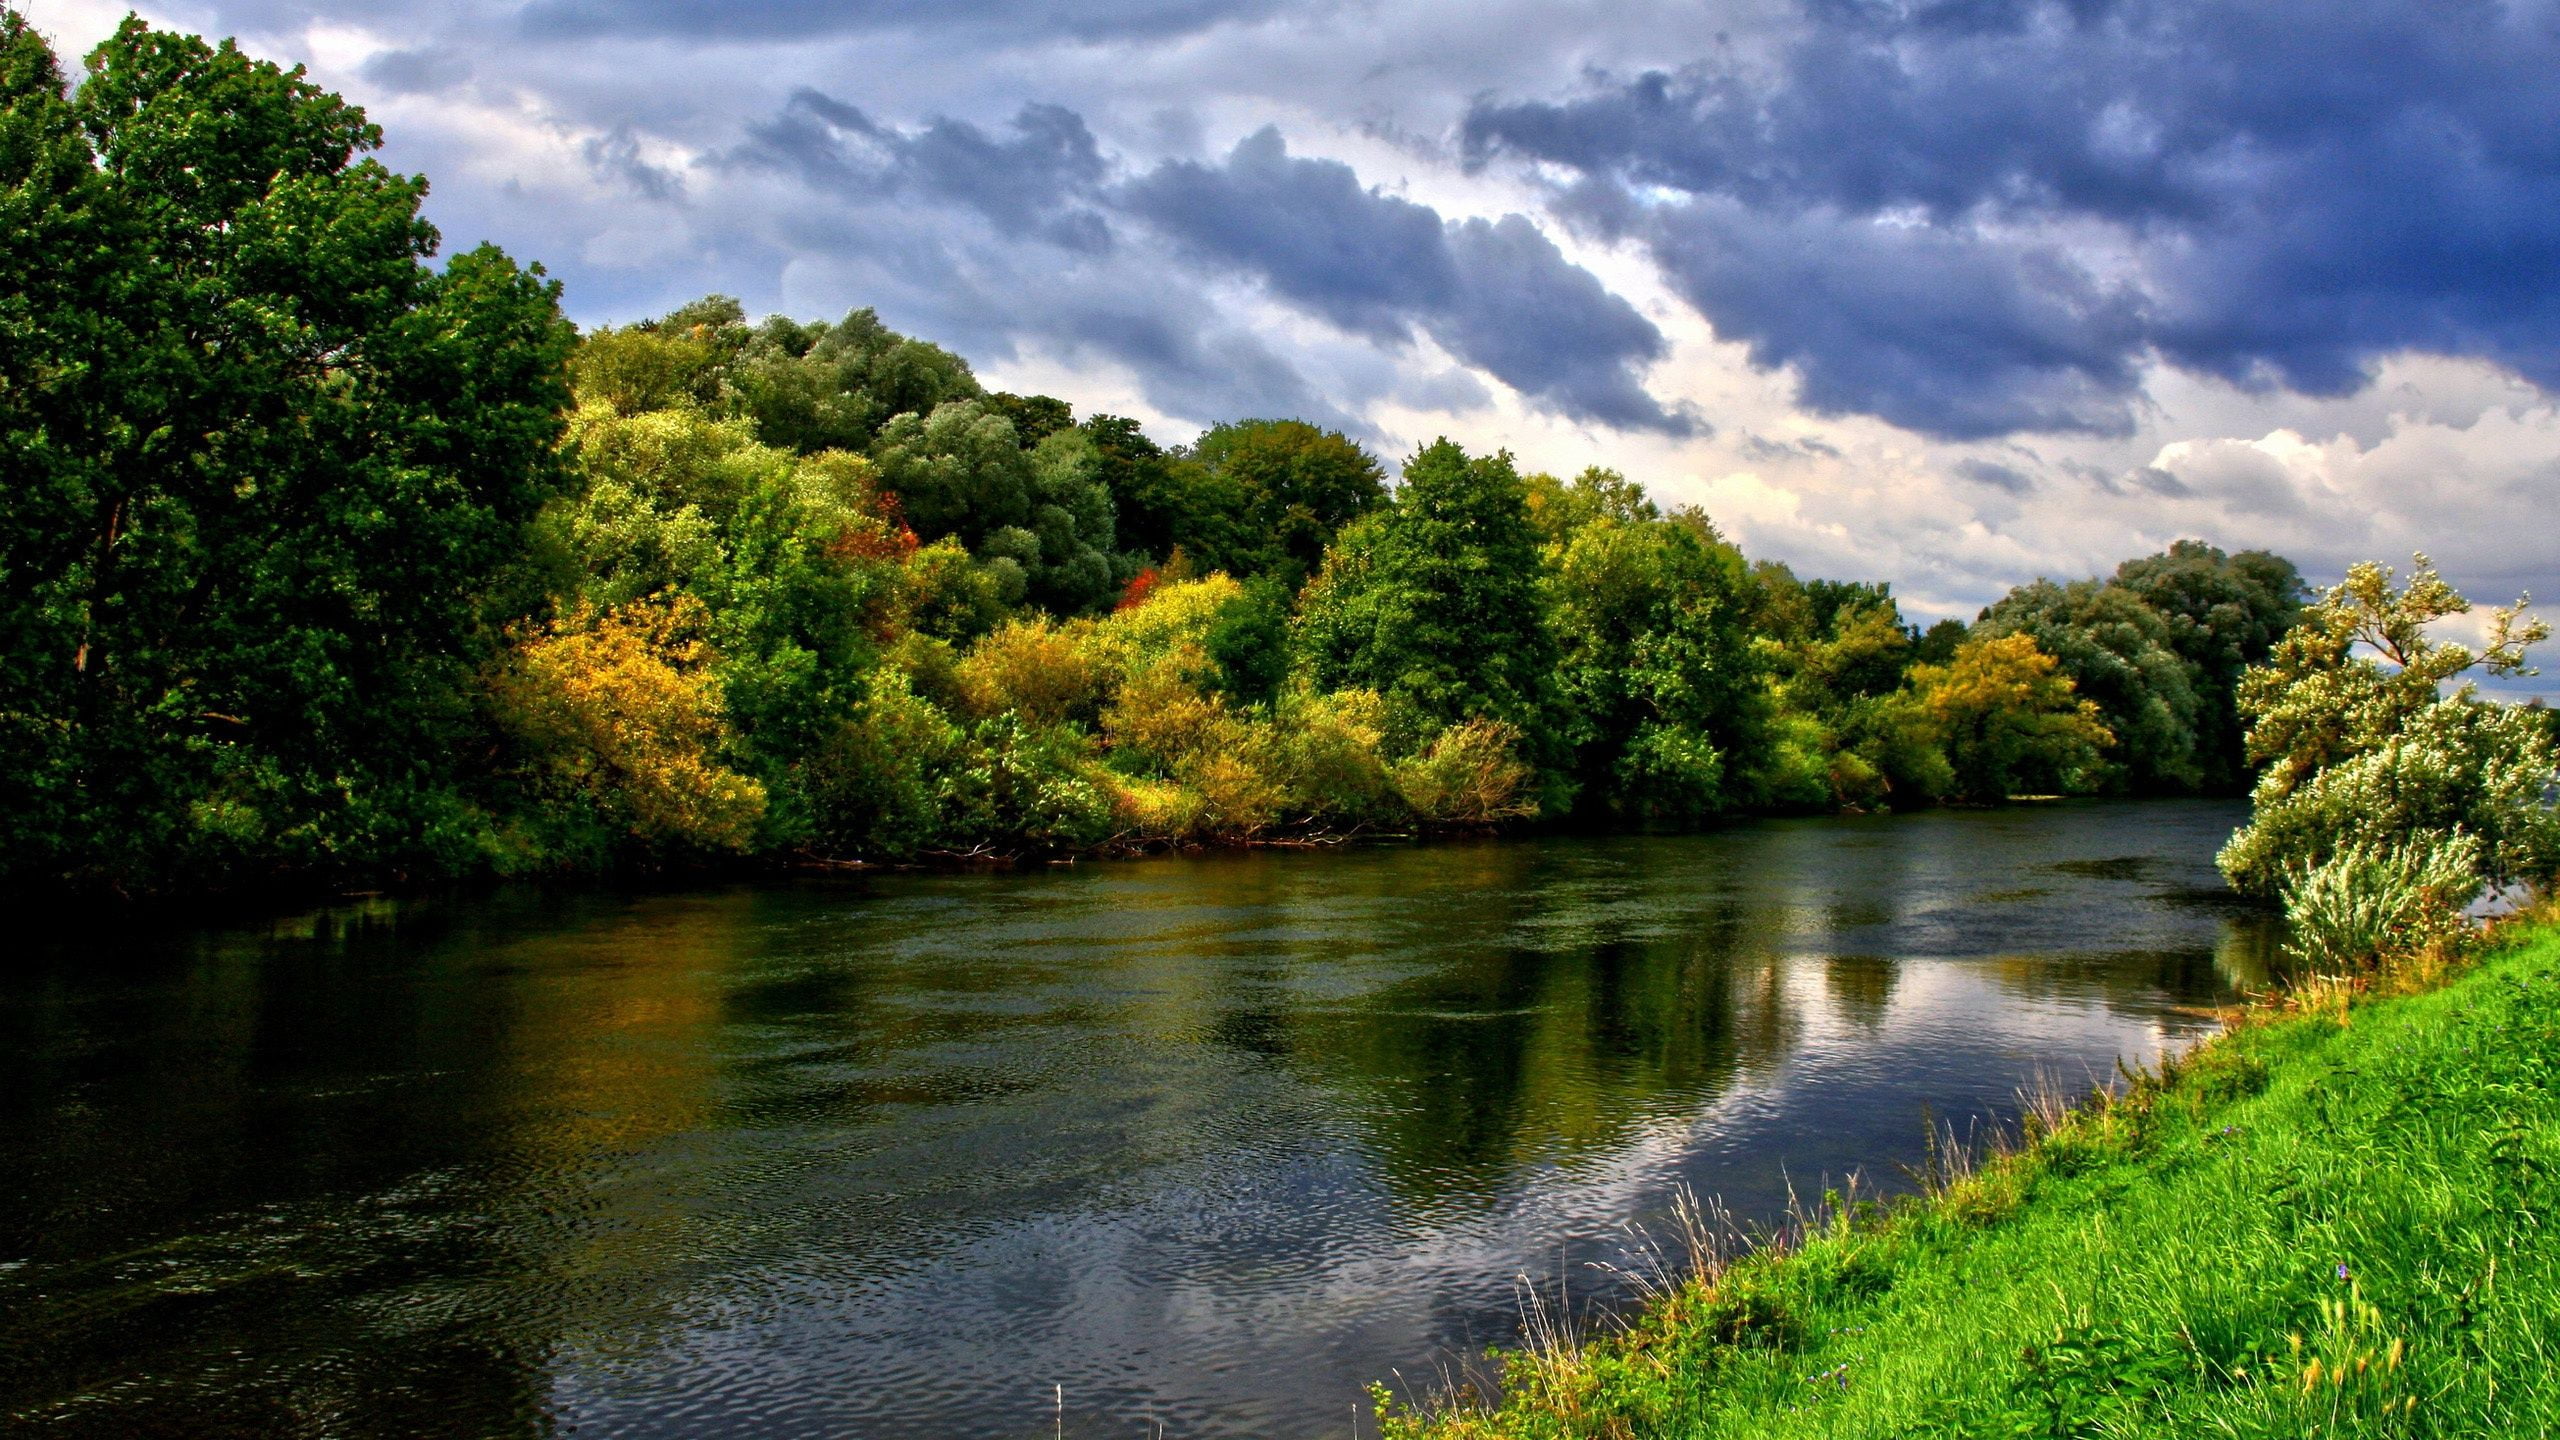 body of water and green leafed trees, river, forest, nature, landscape